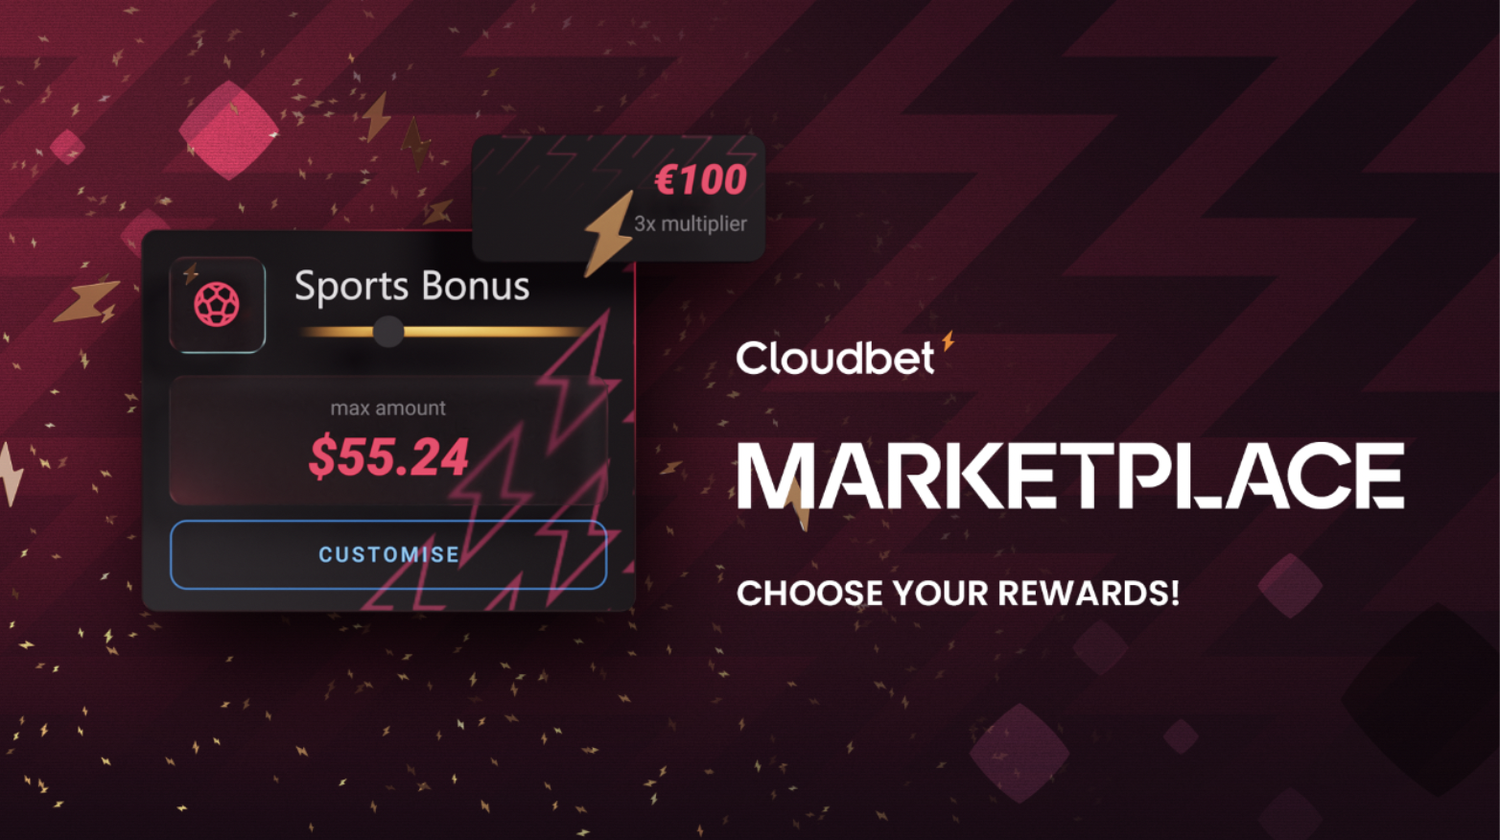 Cloudbet crypto casino offers exciting new Marketplace loyalty system